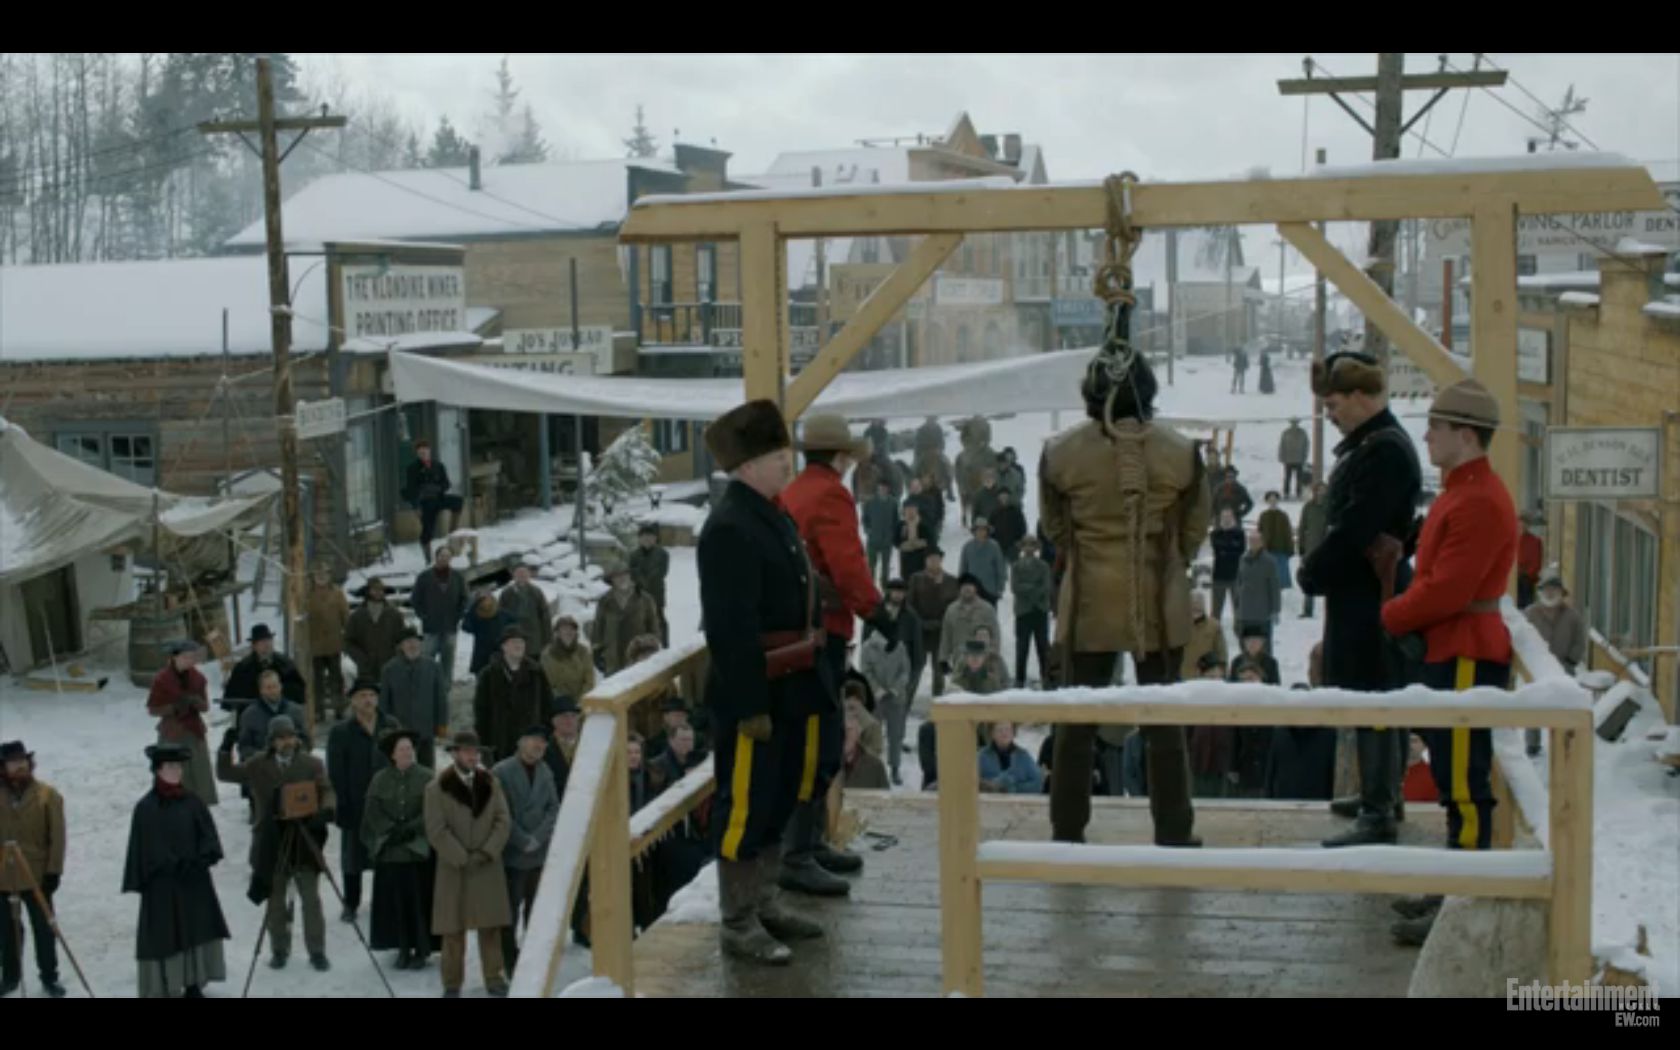 Terry A. Brown (in fur hat) guarding prisoner on the gallows in a scene from Discovery Channel's Klondike.